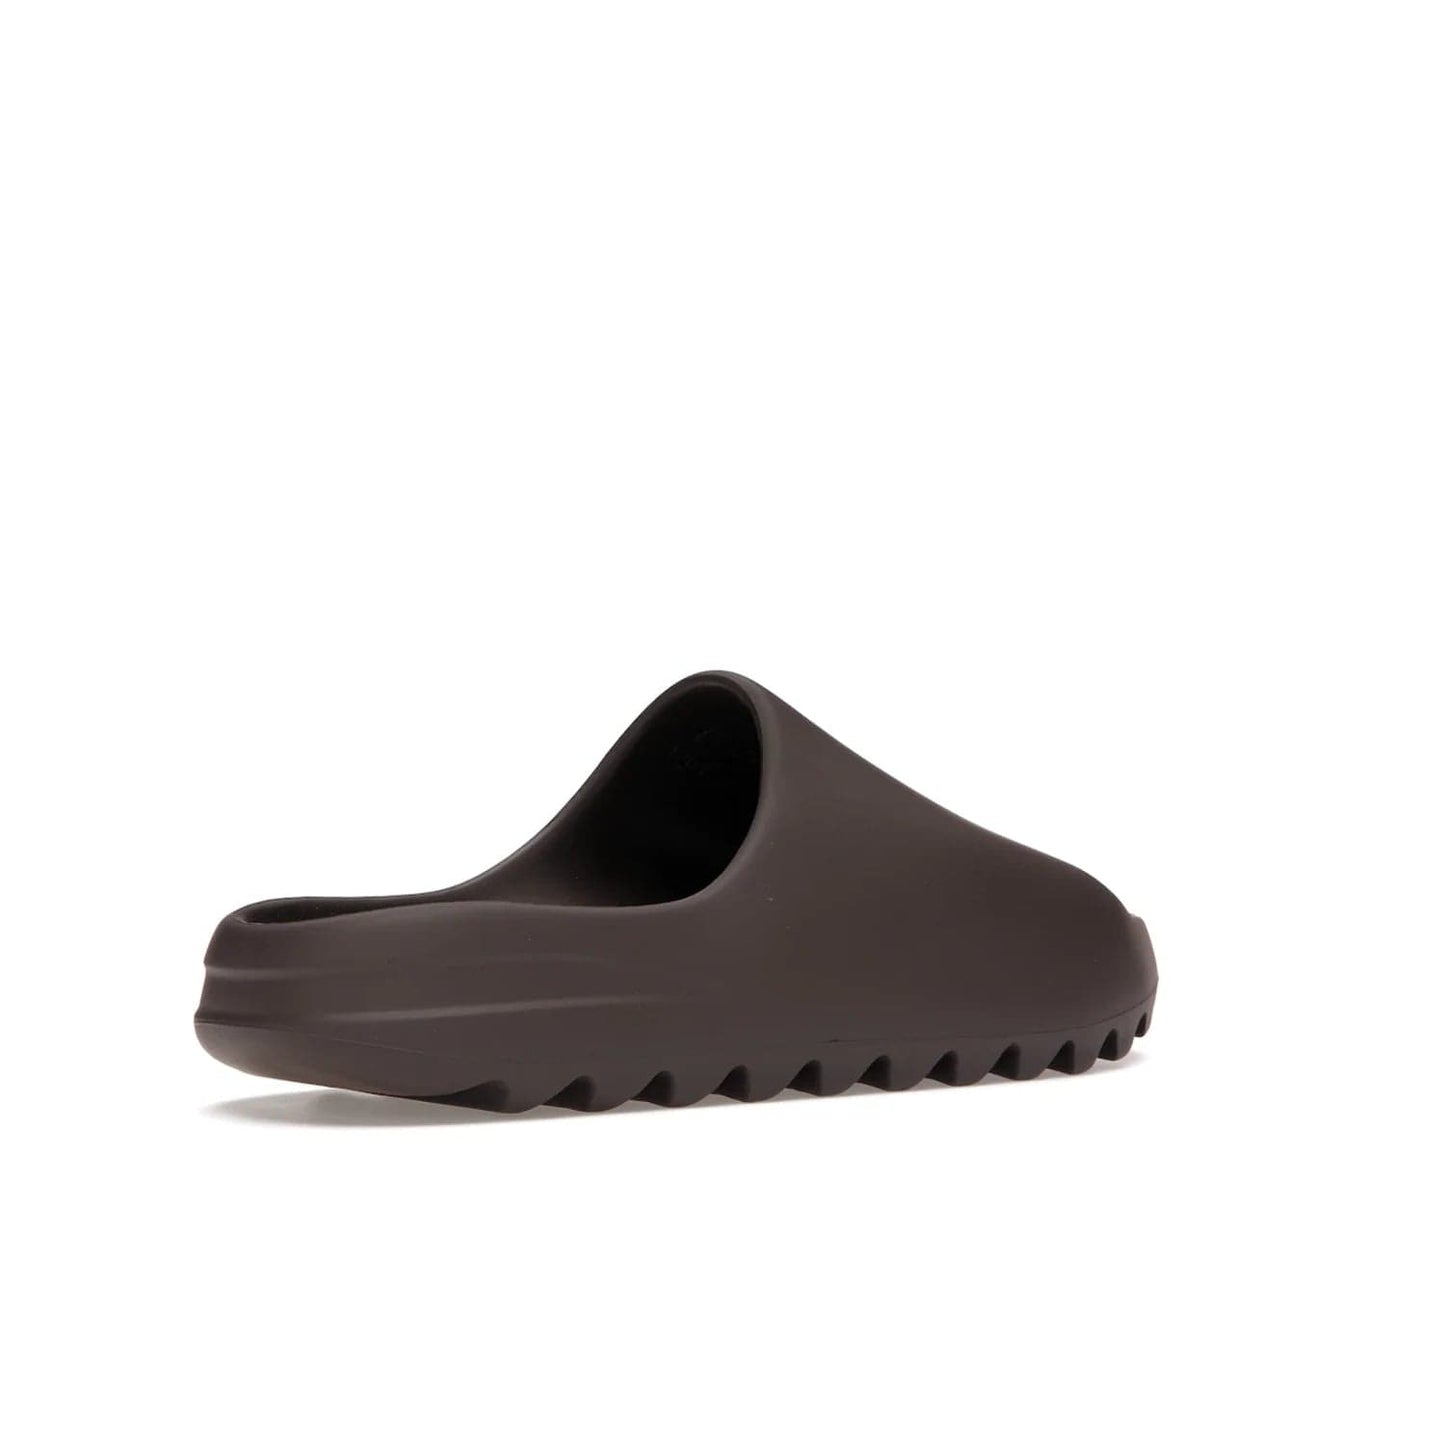 adidas Yeezy Slide Soot - Image 33 - Only at www.BallersClubKickz.com - Shop the Yeezy Slide Soot sneaker by Adidas, a sleek blend of form and function. Monochrome silhouette in Soot/Soot/Soot. Lightweight EVA foam offers comfort and durability. Get the must-have style today.